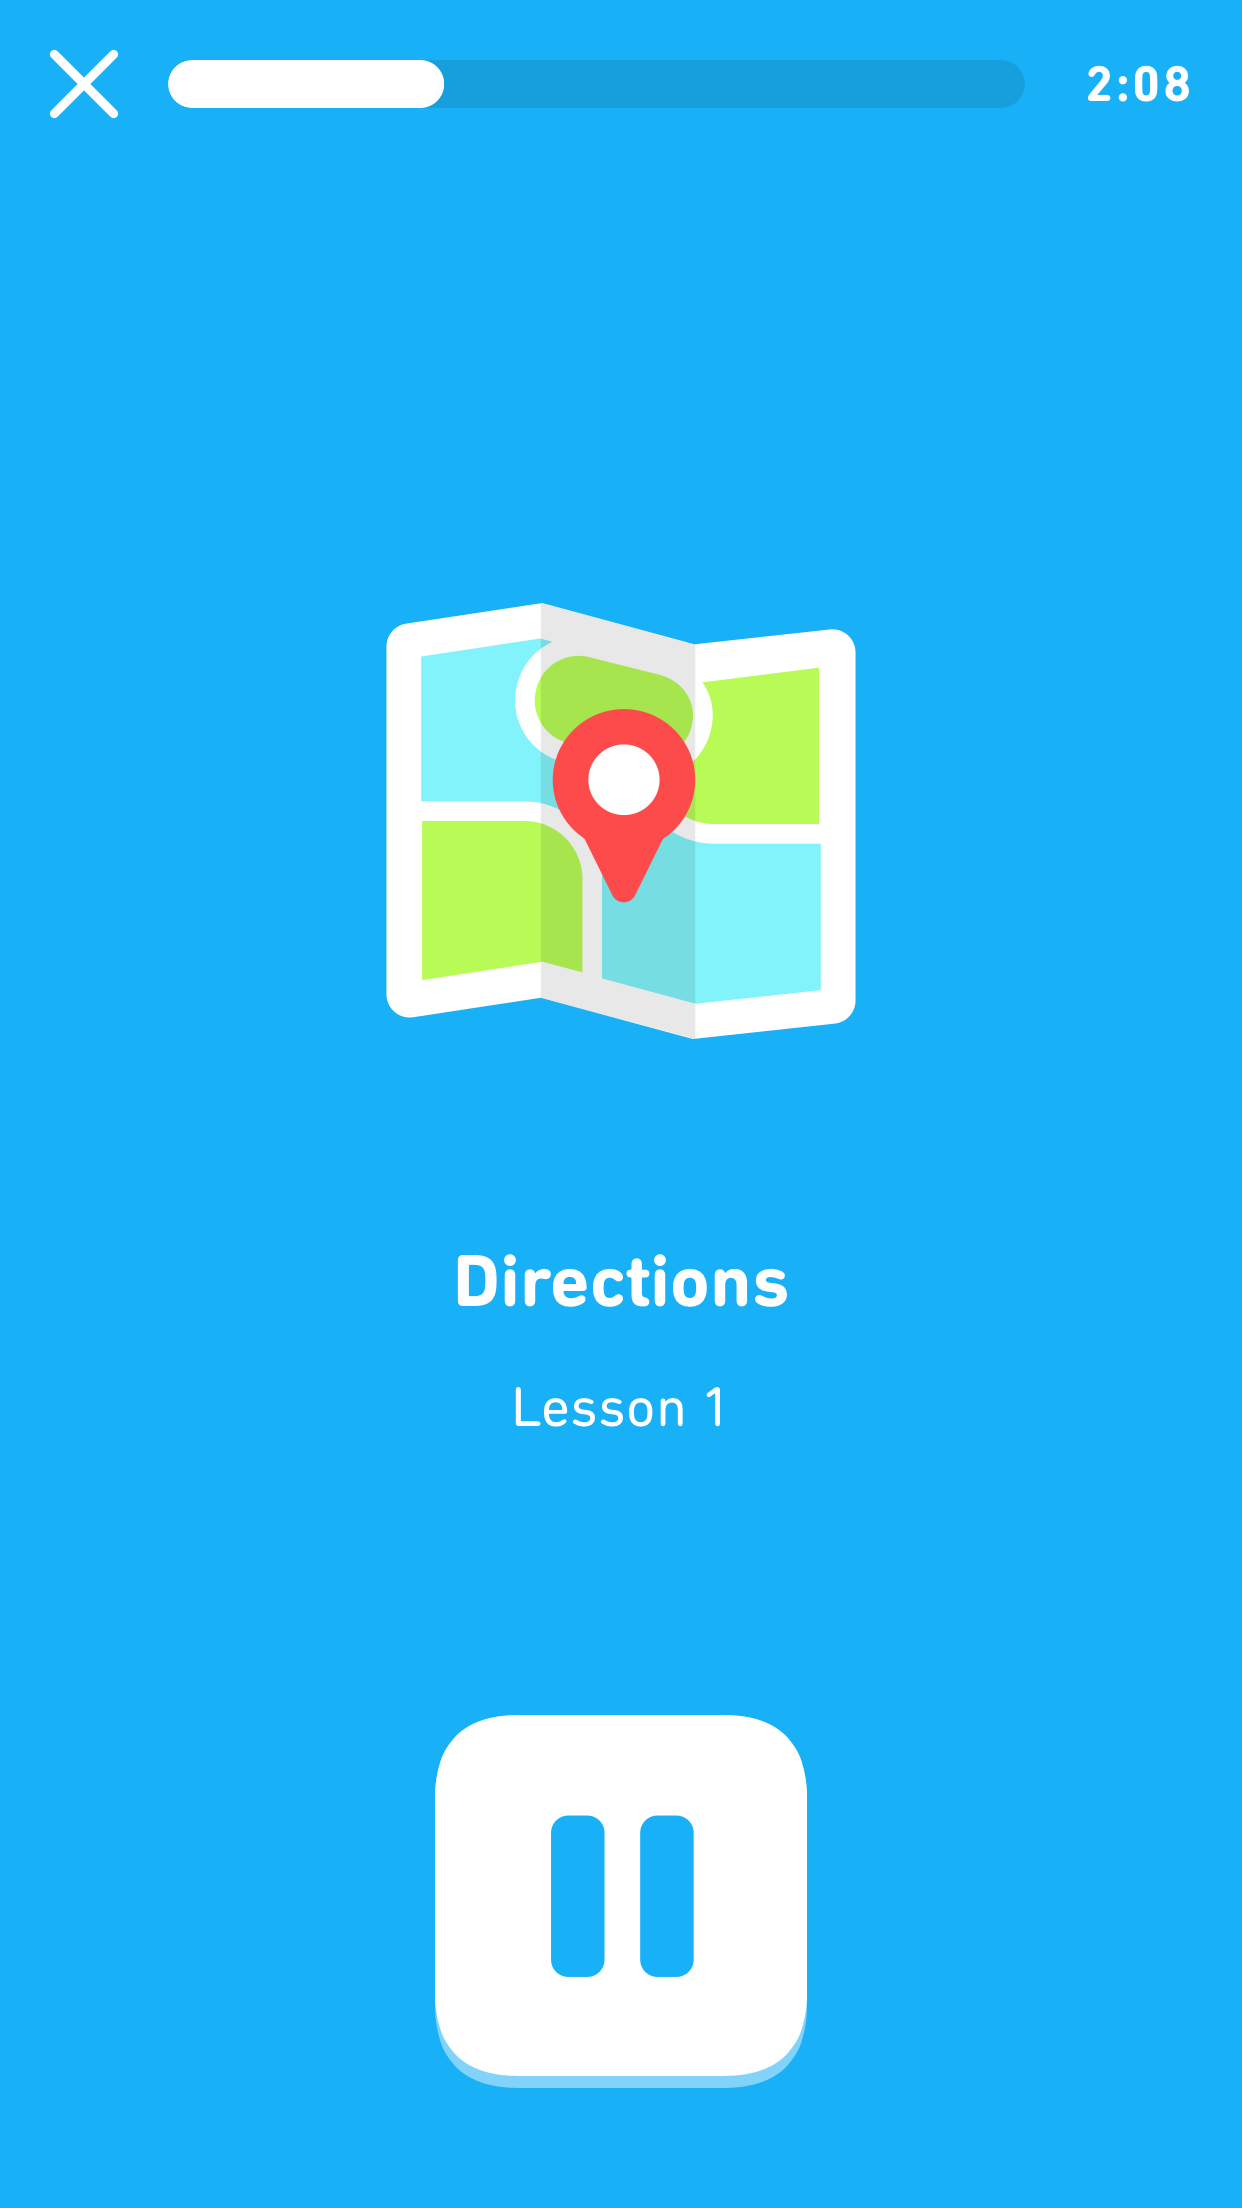 Screenshot of an audio lesson. The screen is all blue and in the center is a folded map. Under the map is the lesson title, "Directions," and the lesson number, "Lesson 1." At the bottom is a large pause button.